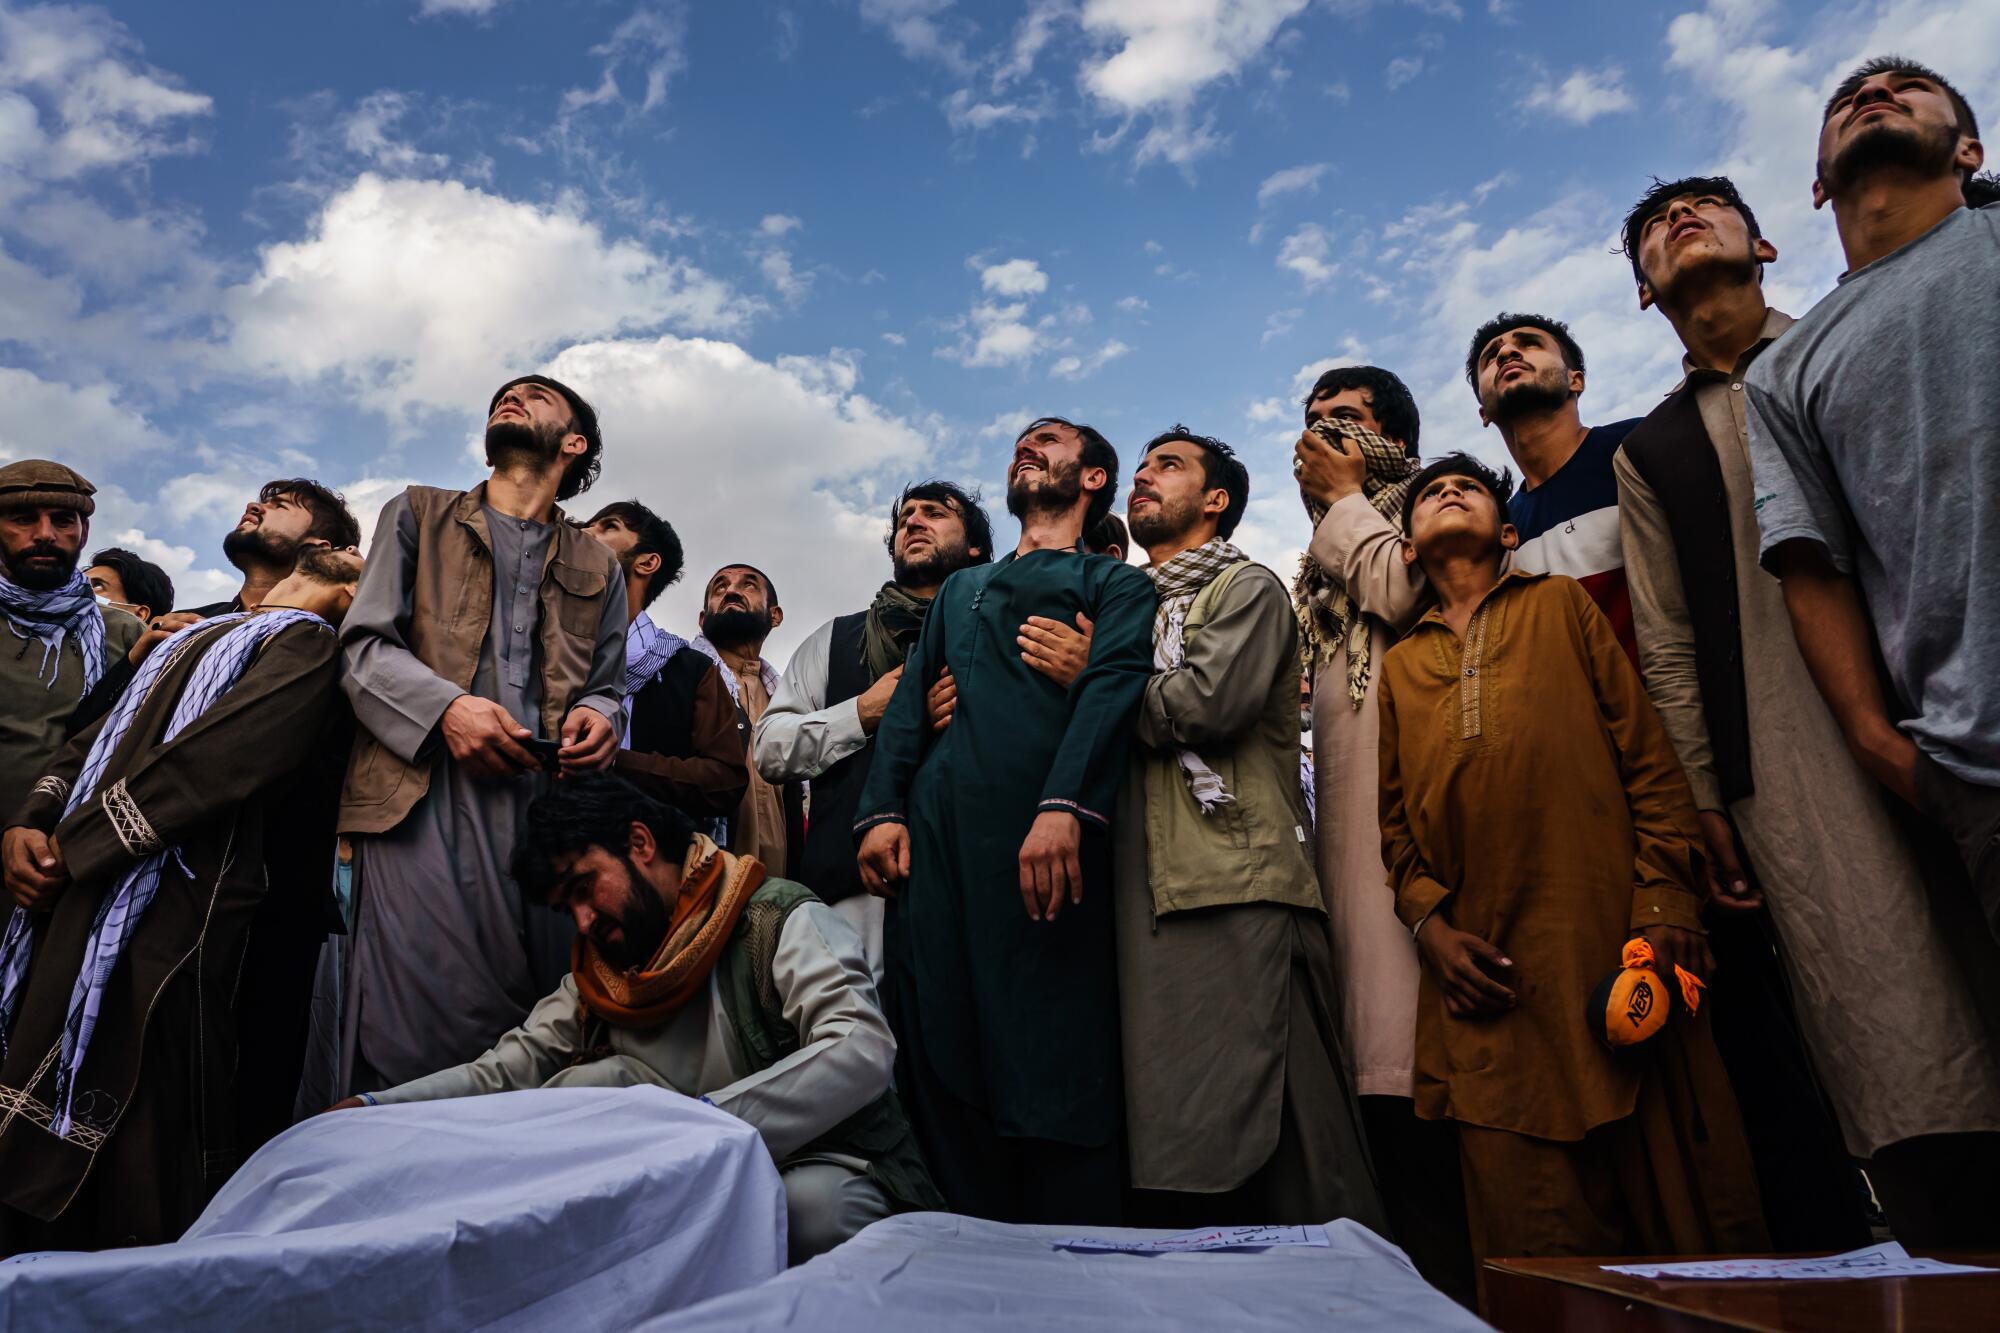 Men in tunics and pants in a winding line on a hillside attend a mass funeral